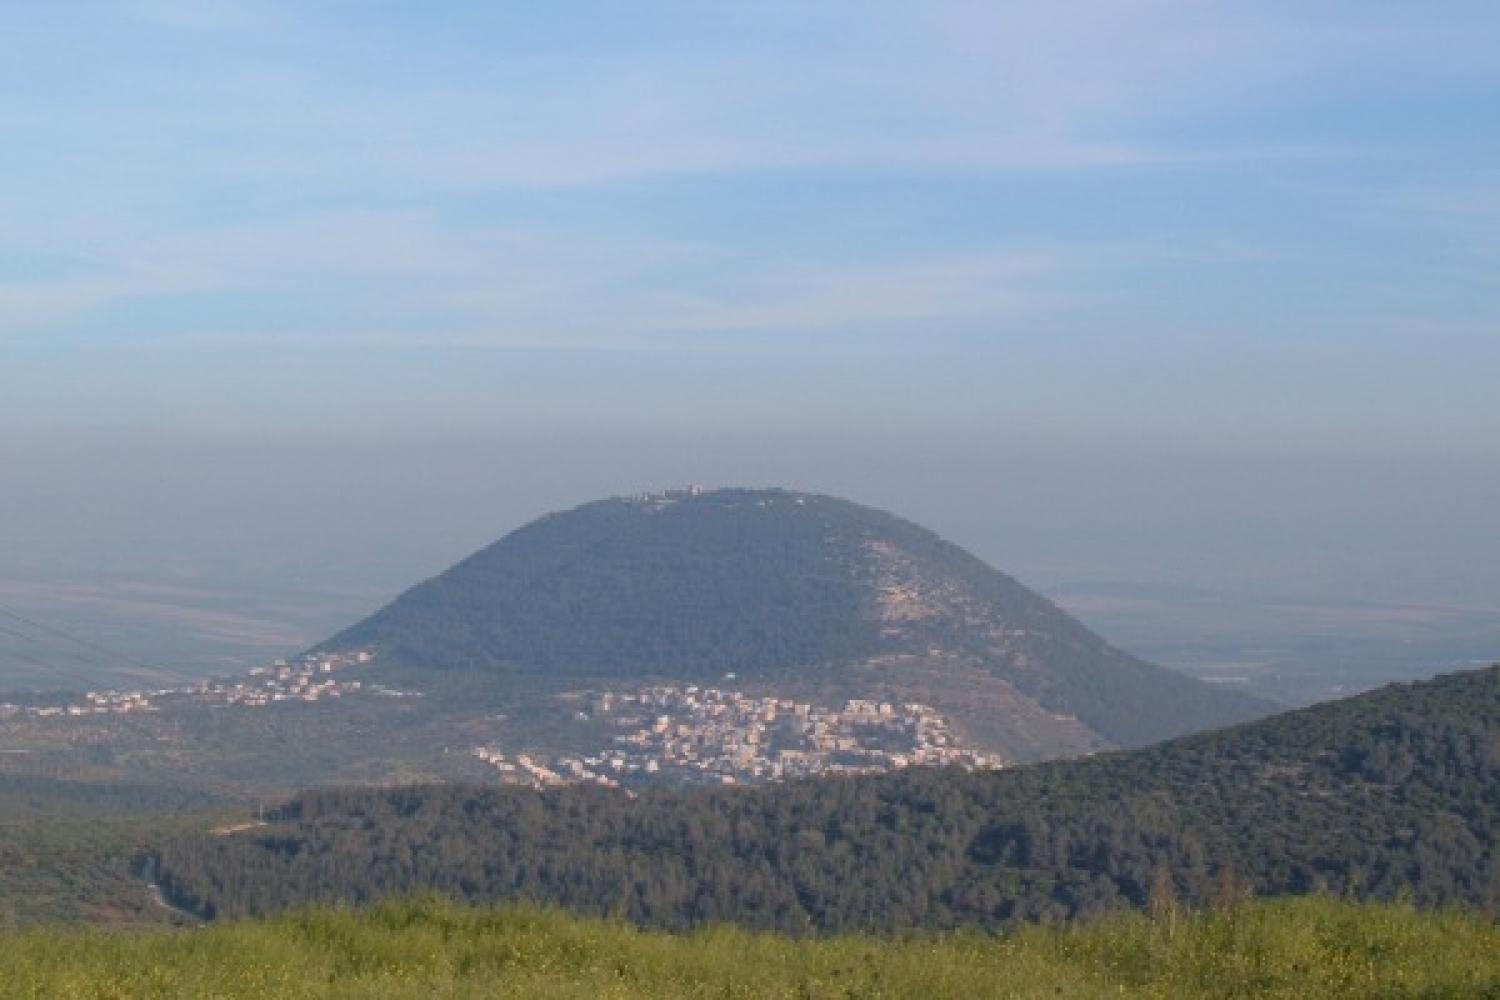 Mount Tabor stands above the Jezreel Valley in southern Galilee.